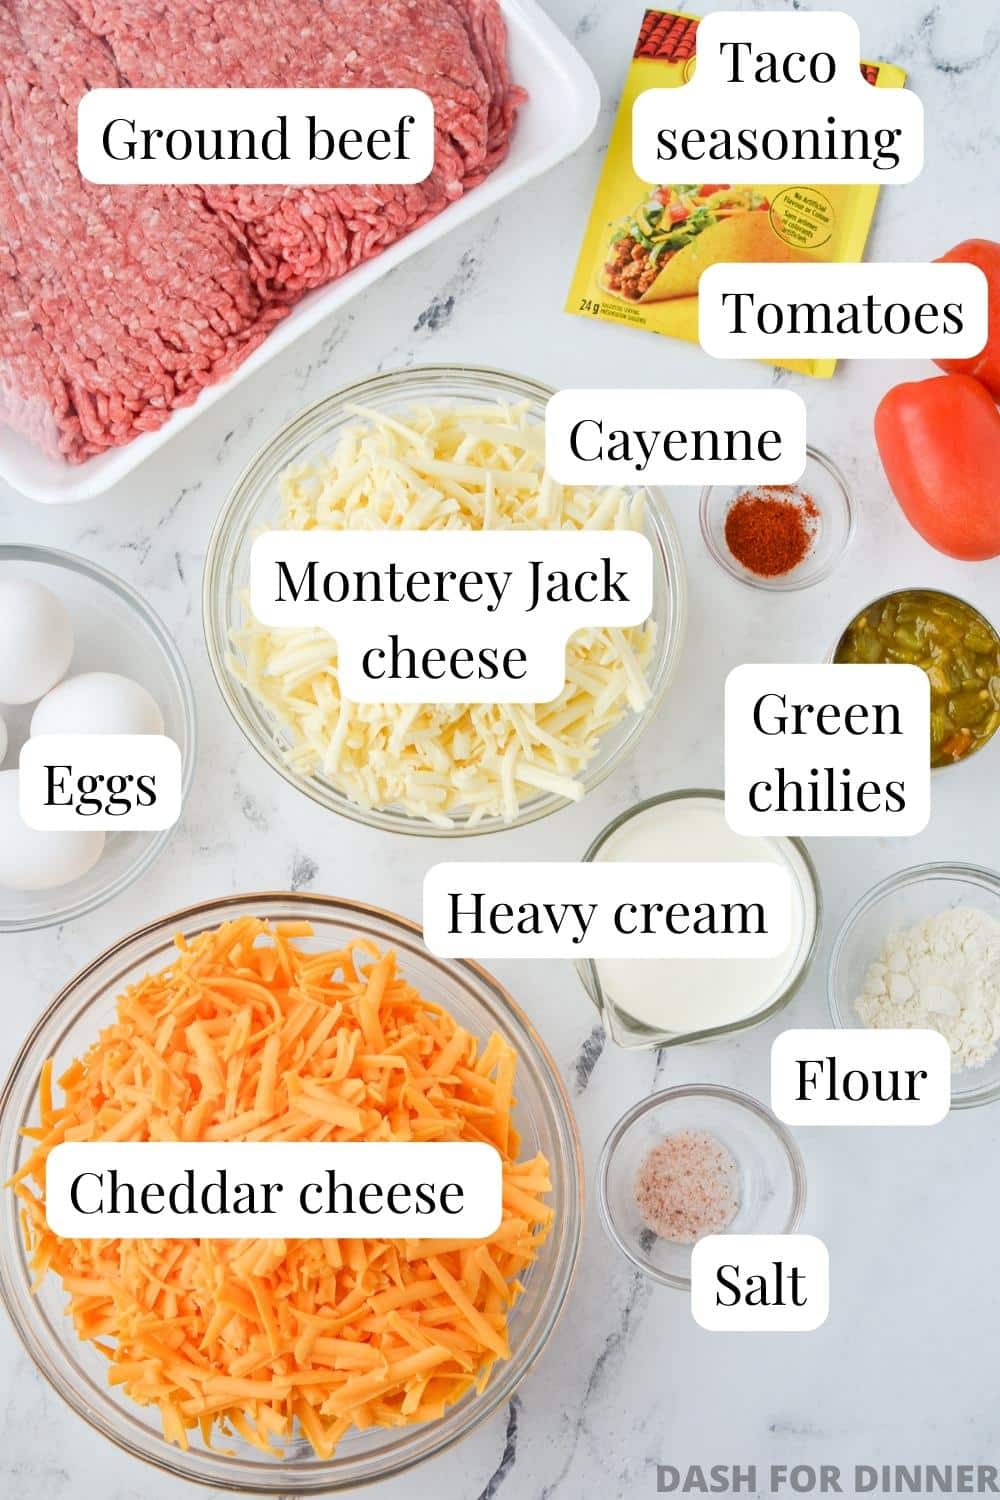 The ingredients to make a cheesy taco casserole: ground beef, cheese, taco seasoning, etc.